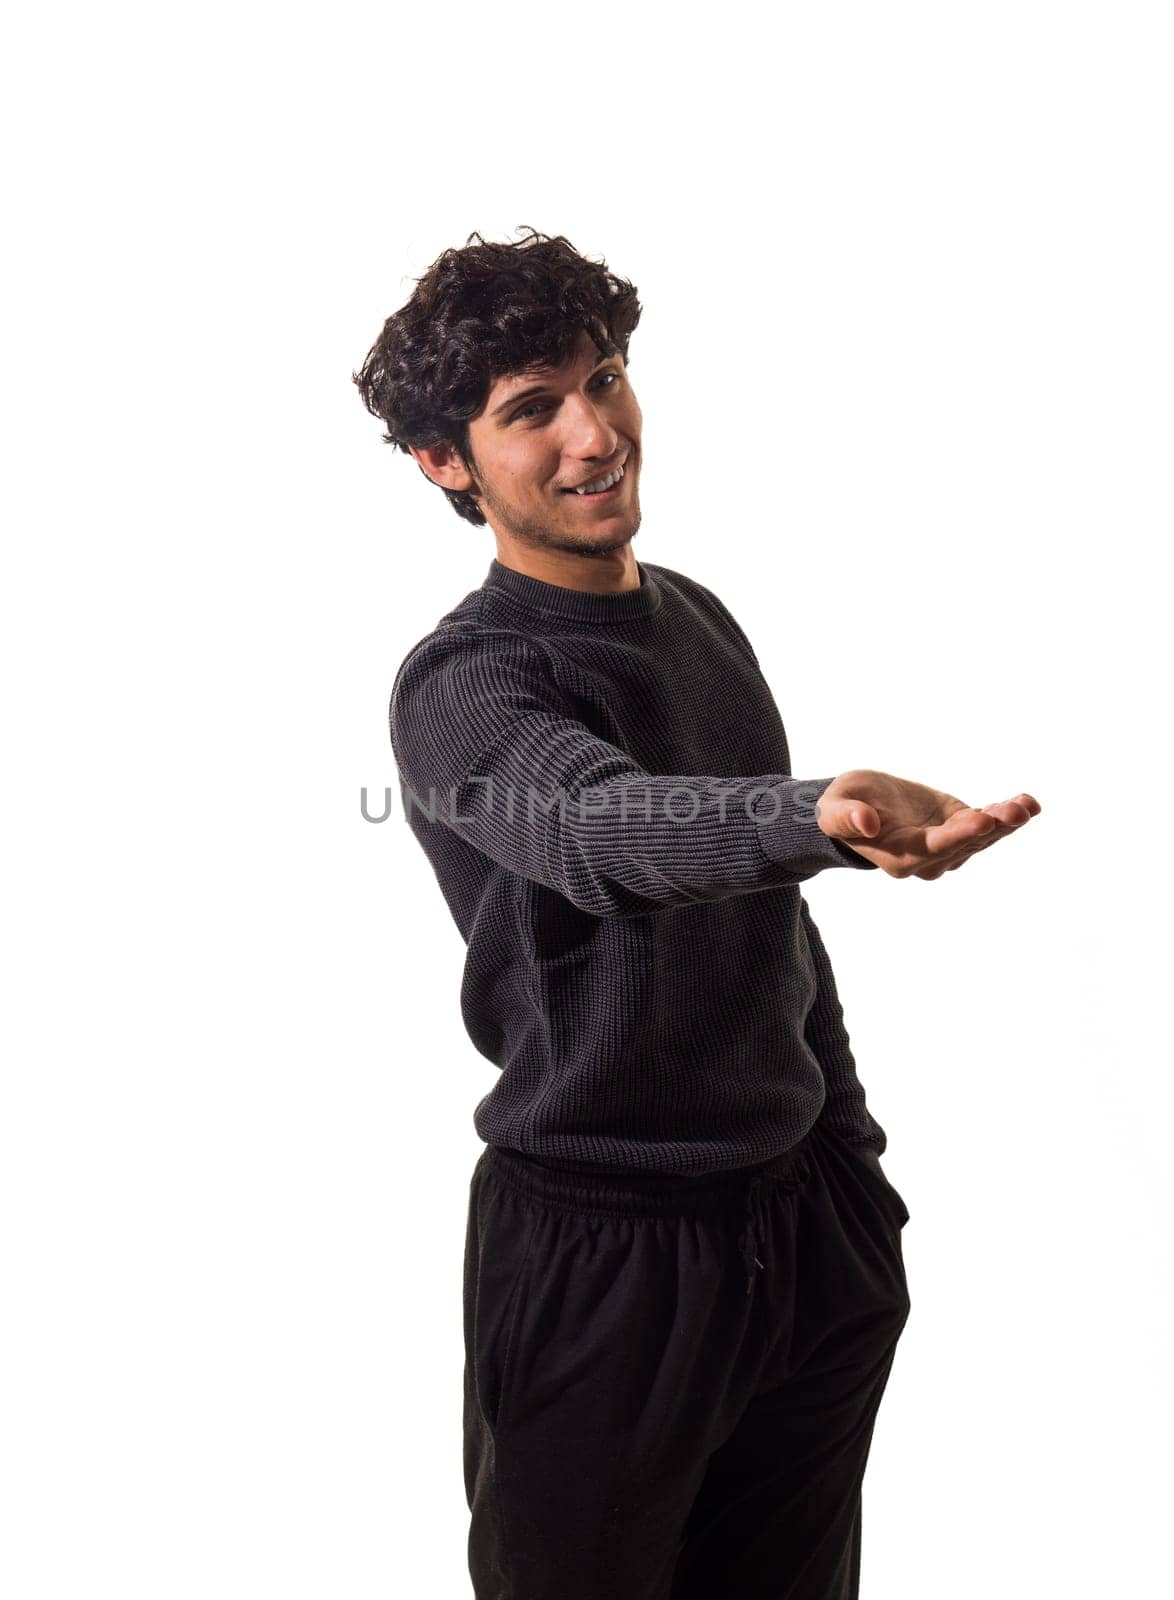 A handsome young man in a black sweater pointing at something, isolated on white